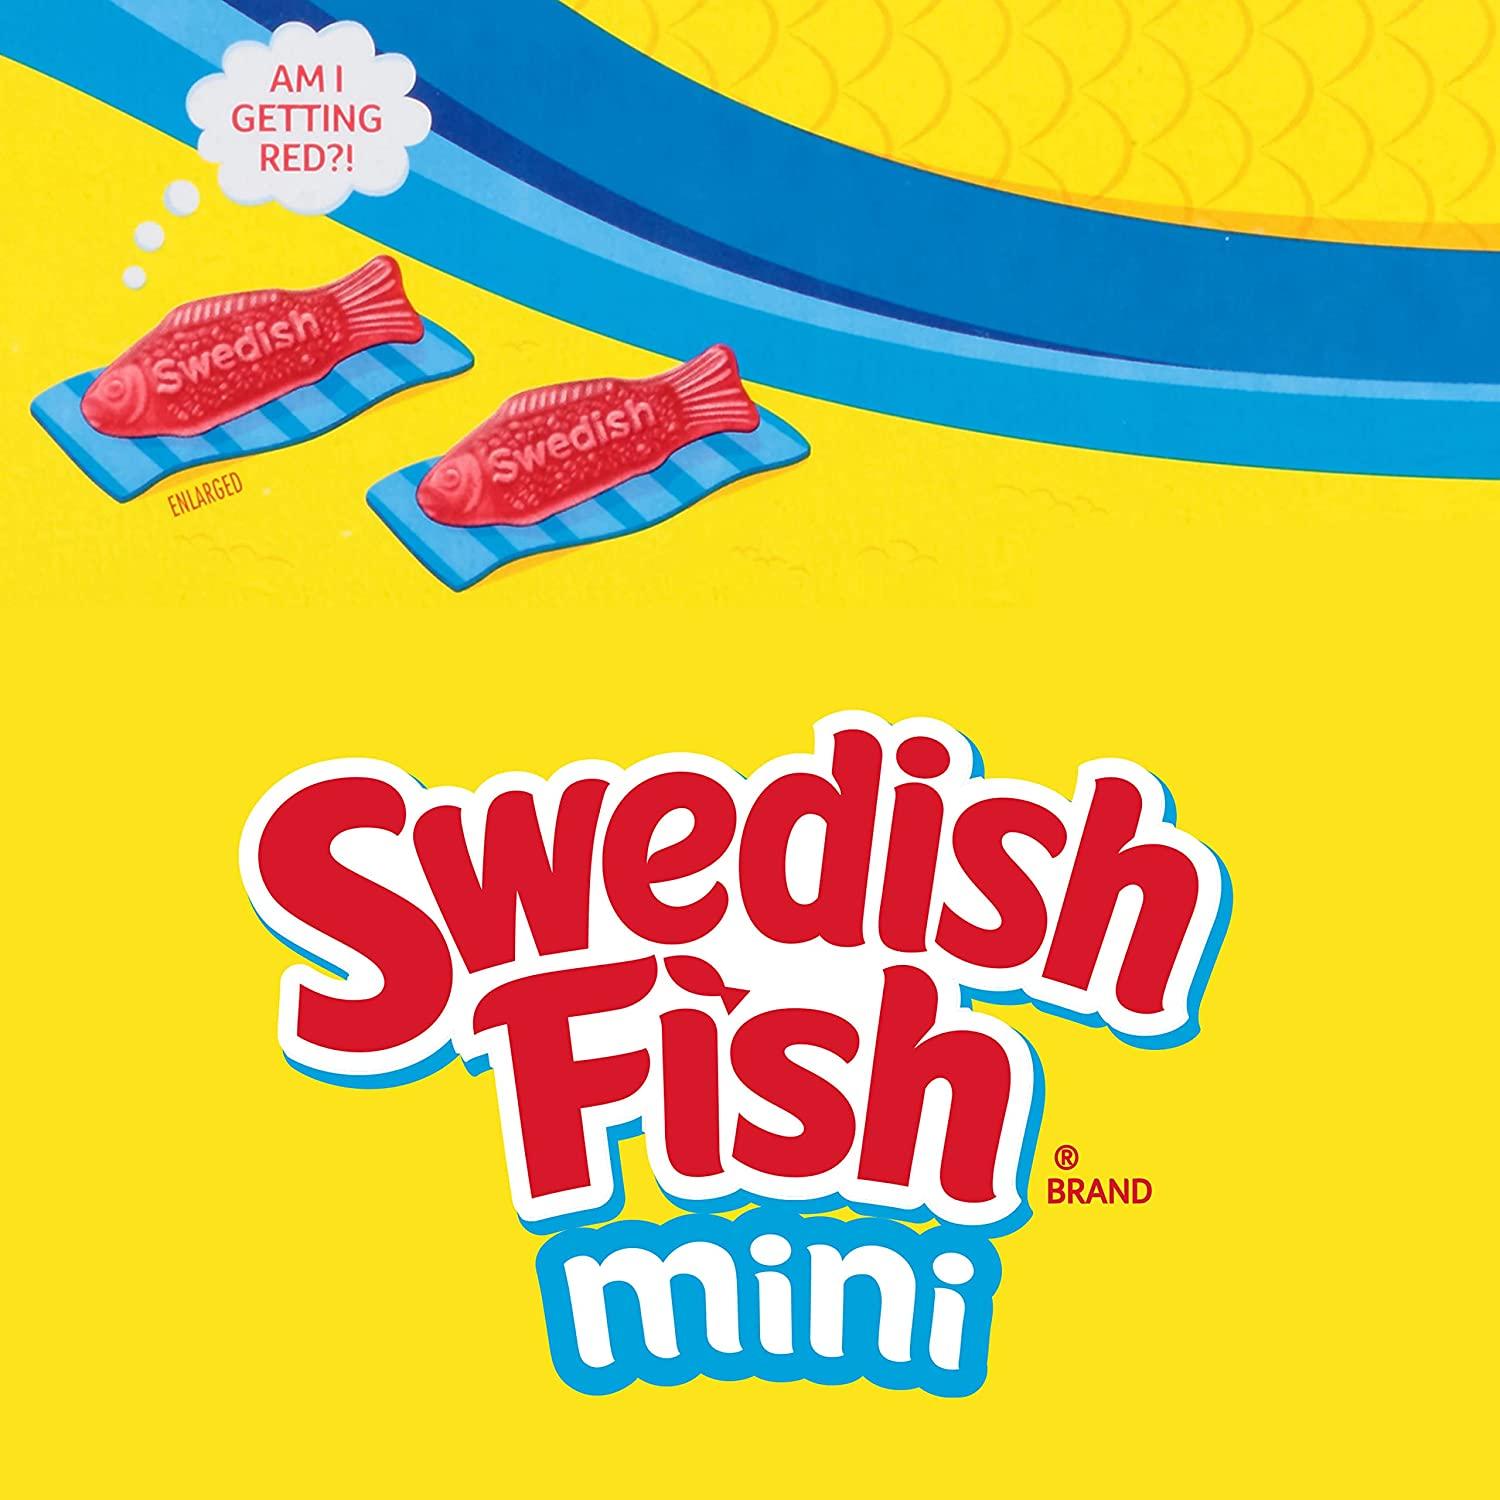 SWEDISH FISH Mini Soft & Chewy Candy, Halloween Candy, 24 Count (Pack of 6)  Mixed-Fruit